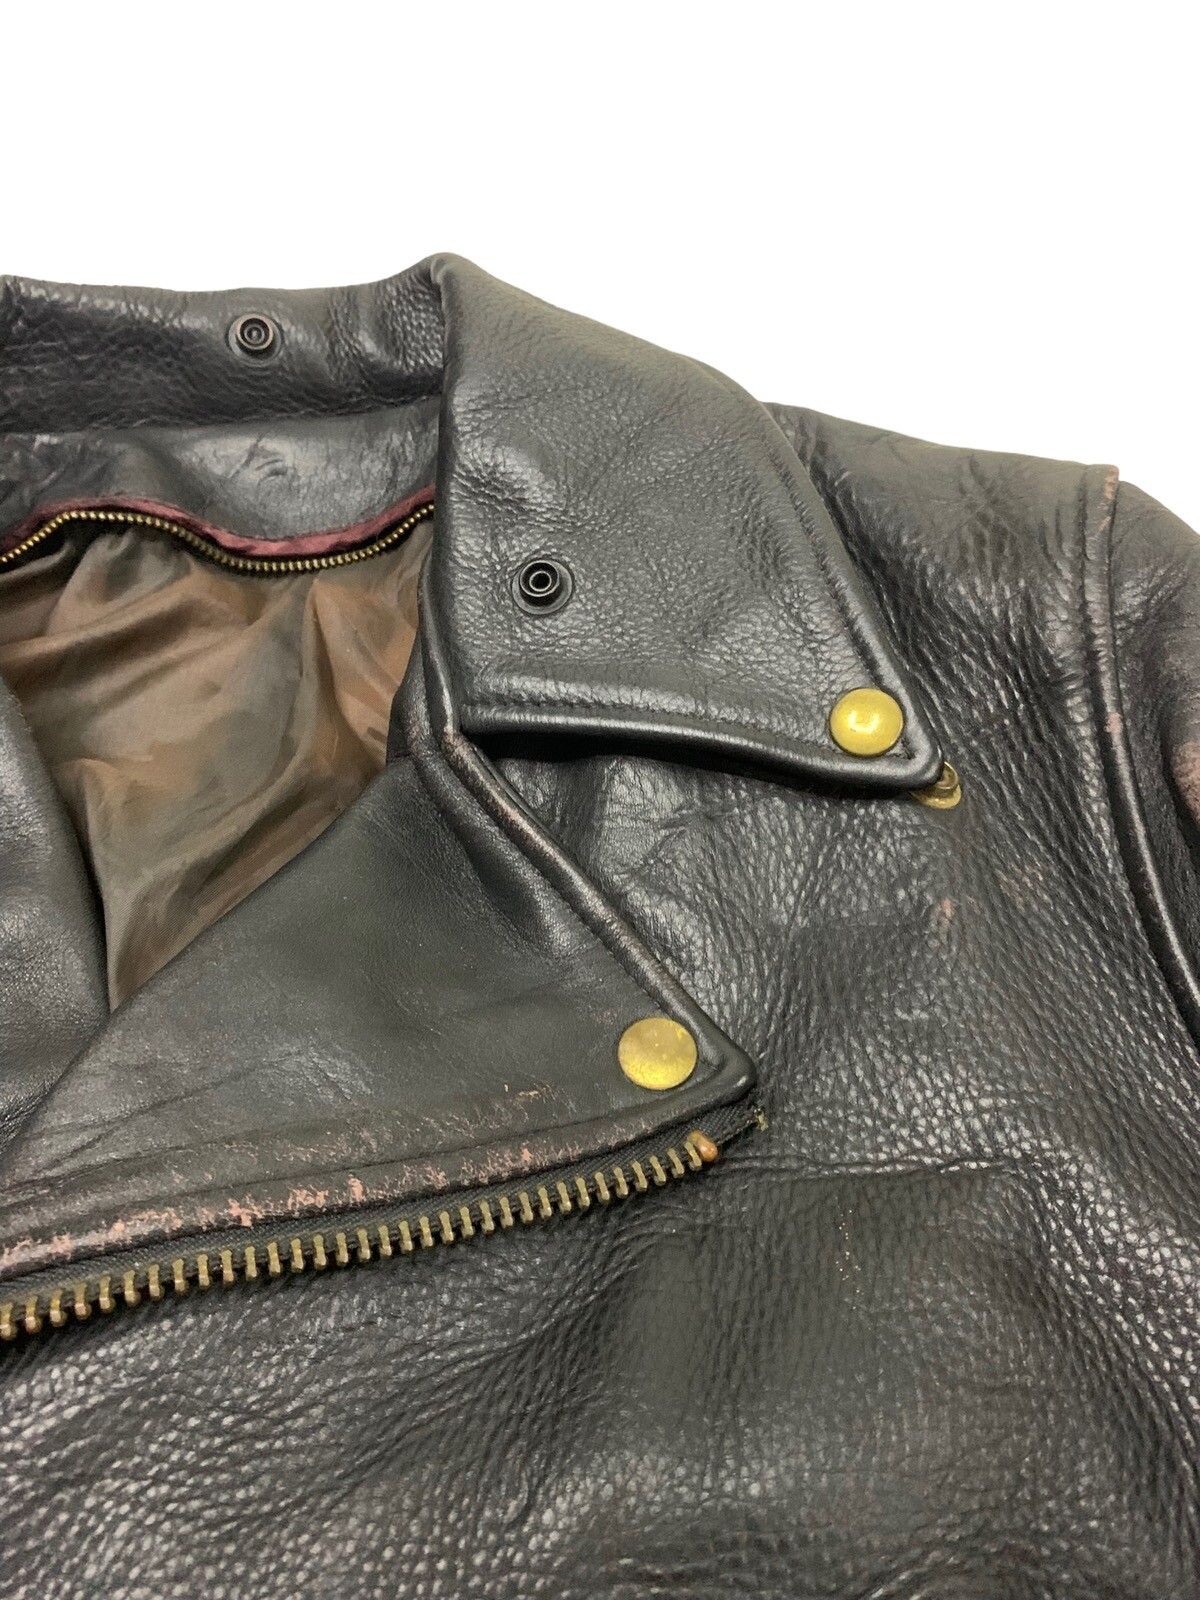 🔥RARE VTG BIKERS LEATHER JACKETS DOUBLE COLLAR - 5